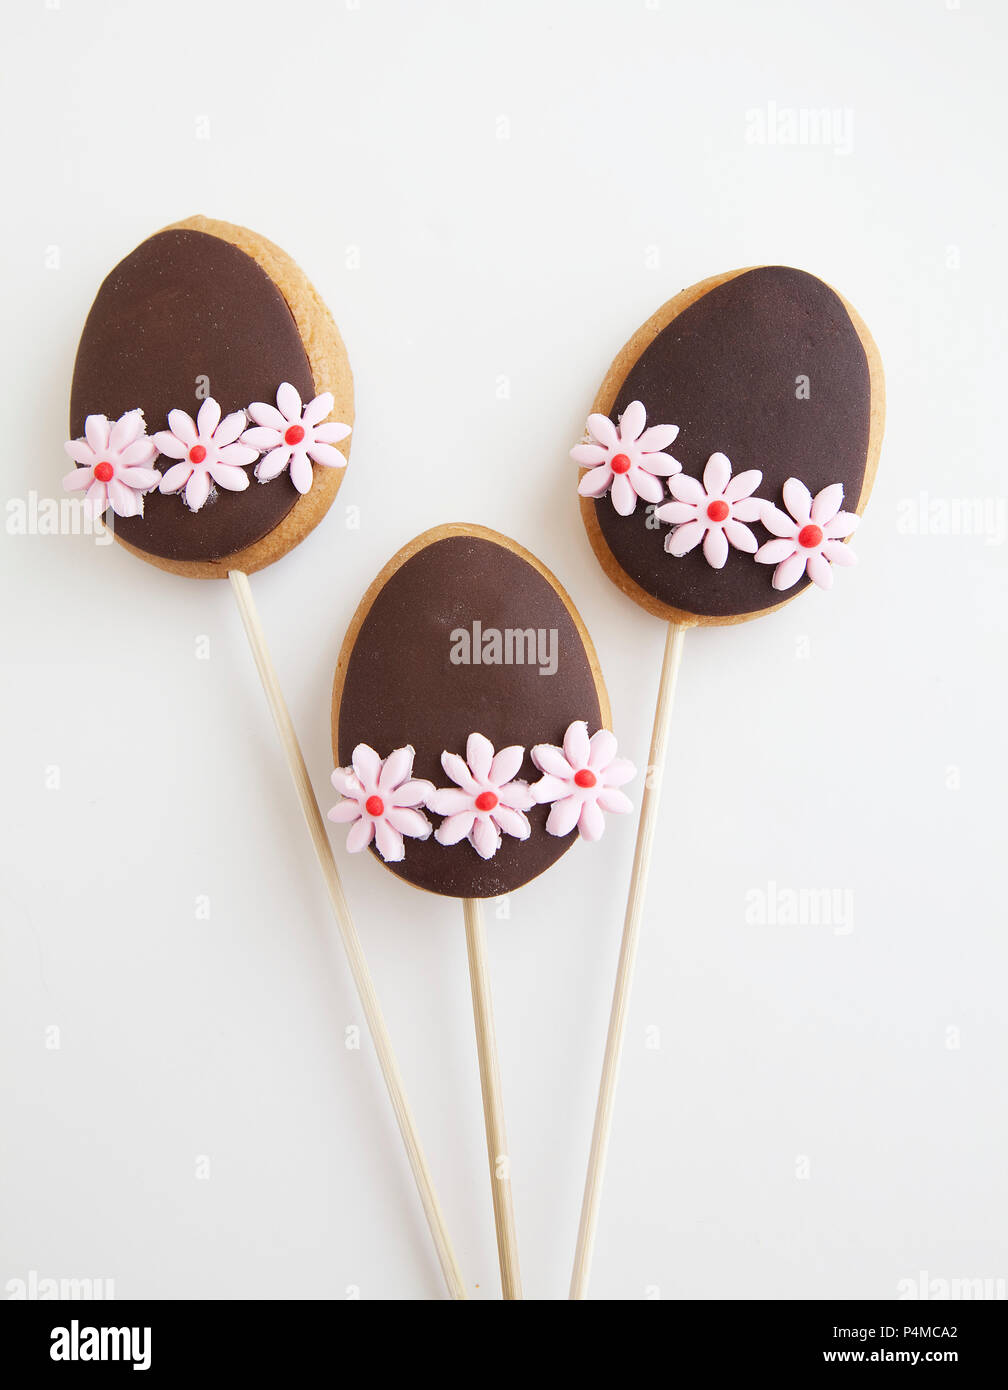 Three Decorated Easter Egg shaped cookies on a stick Stock Photo